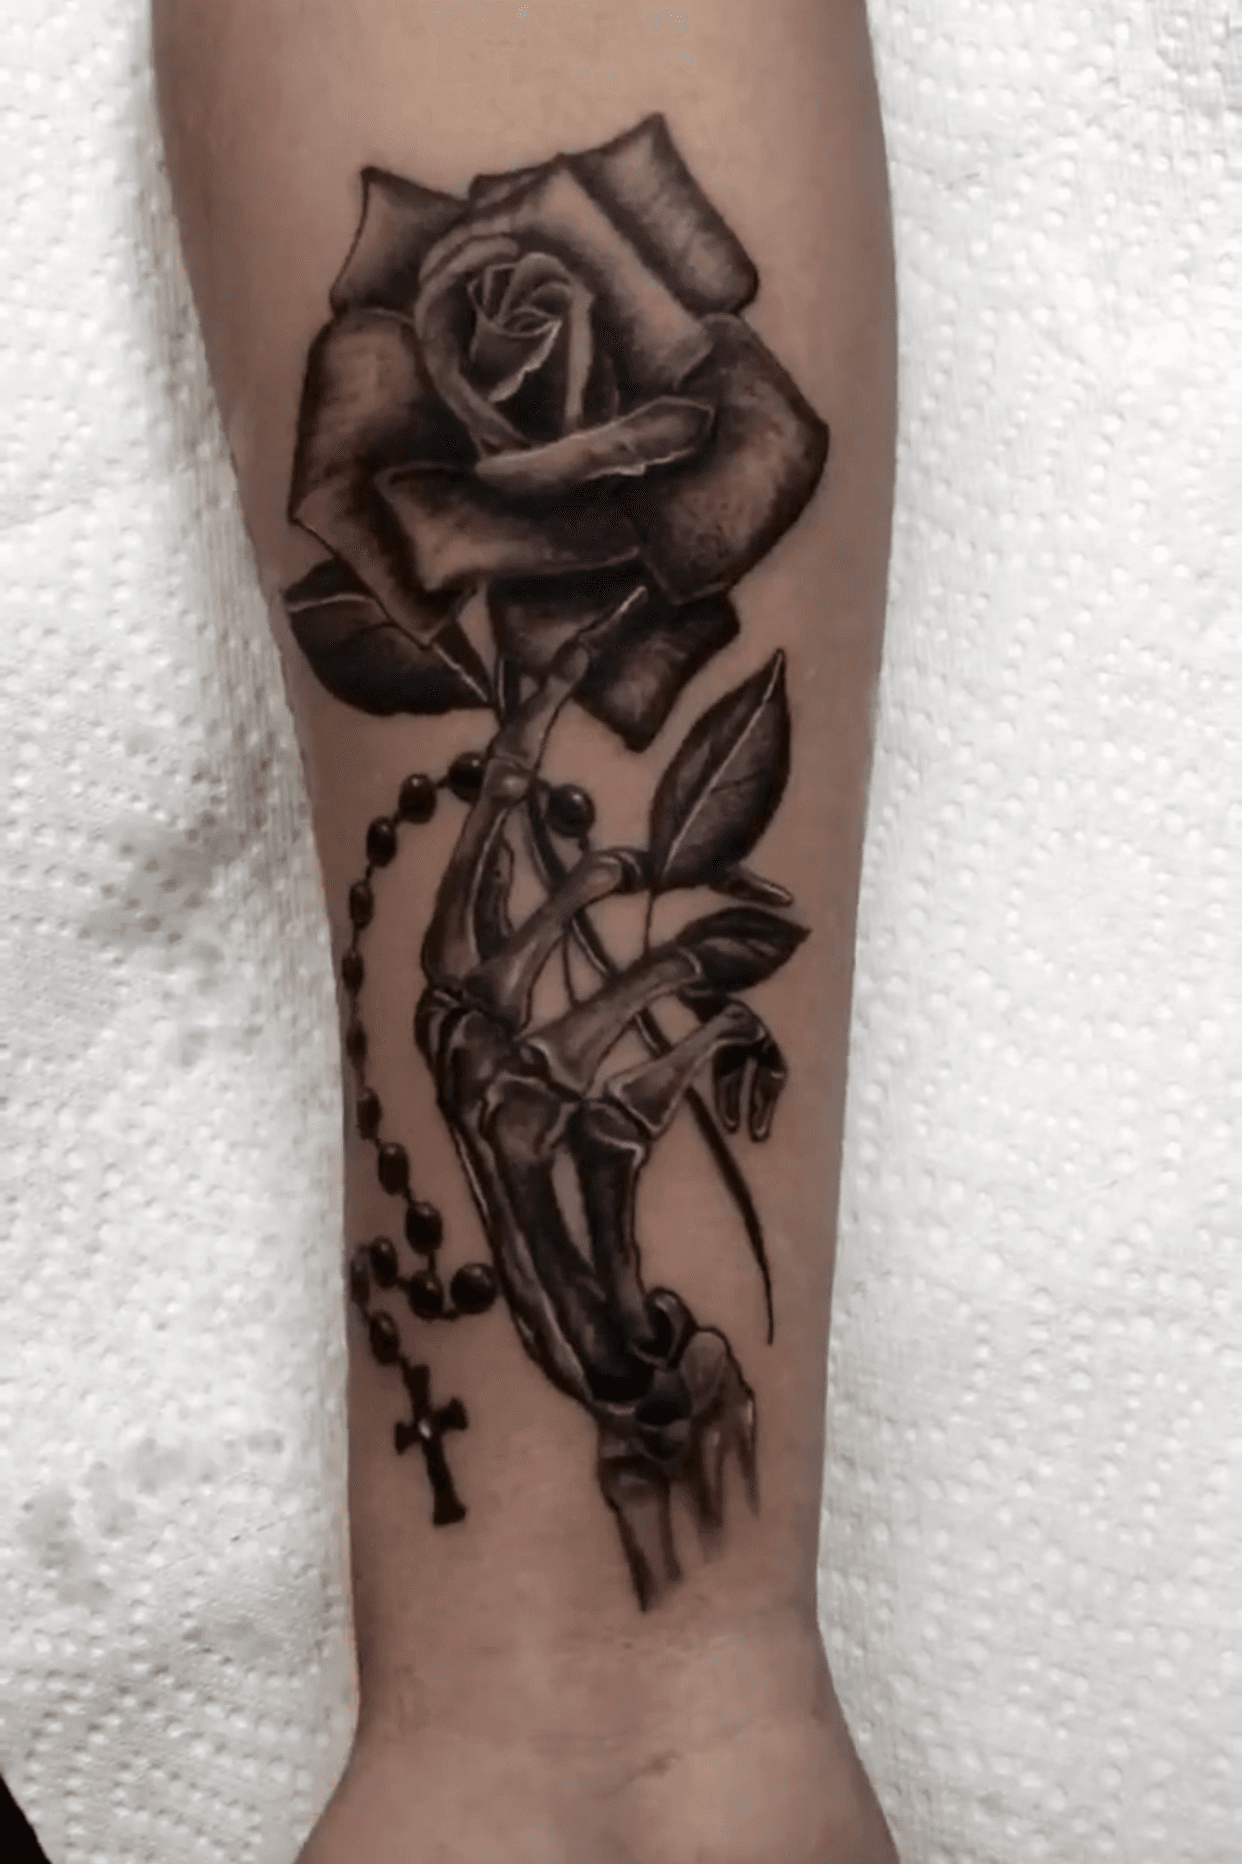 Skeleton hand and wilting rose done by Sydney at blxckroseink in Point  Pleasant  rtattoo